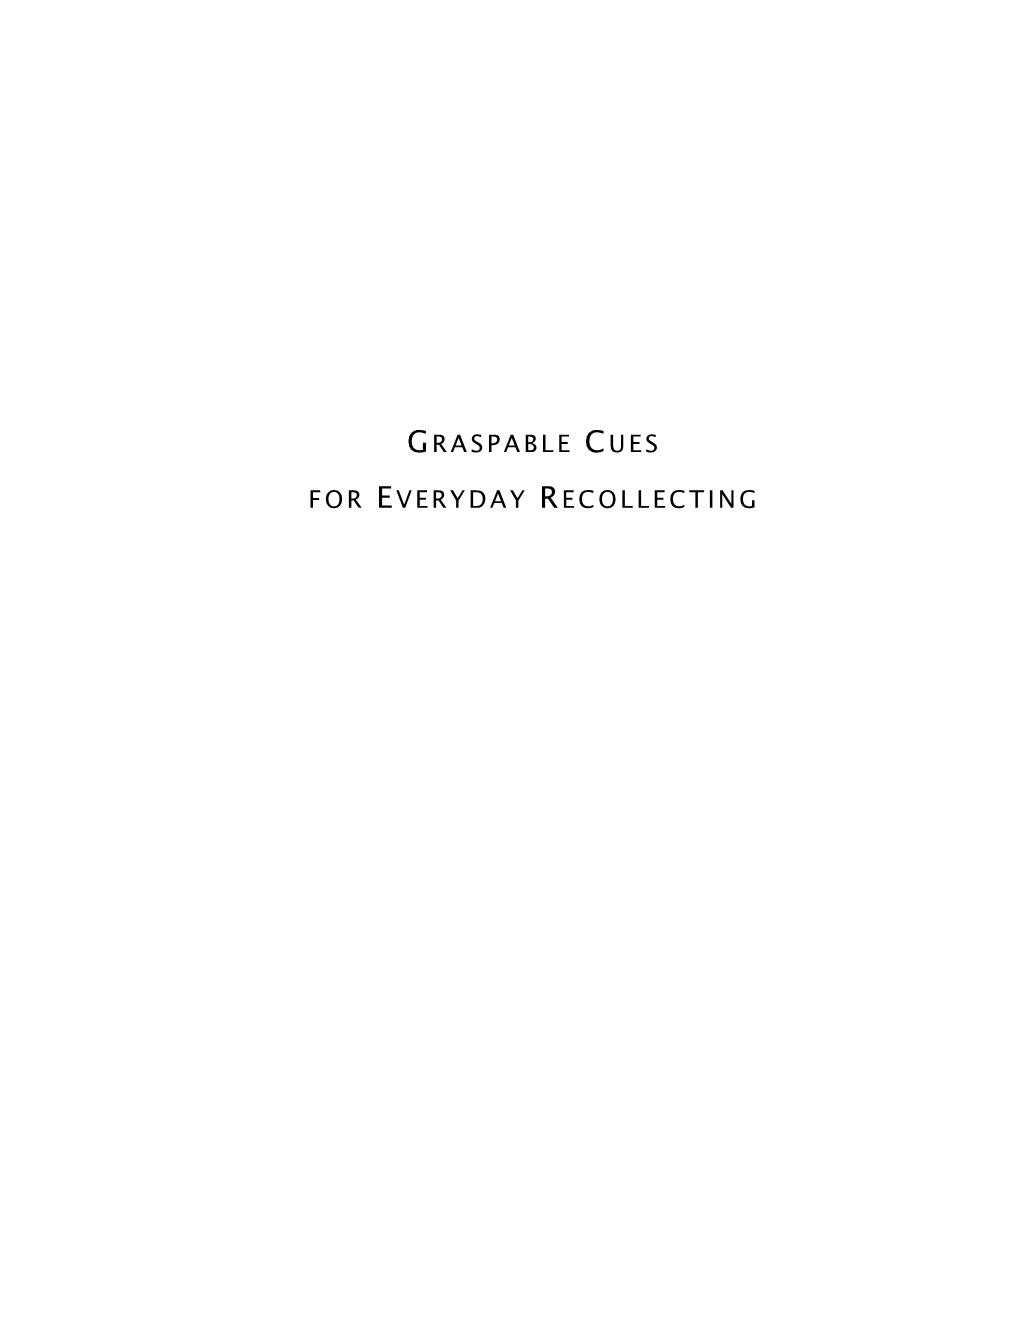 Graspable Cues for Everyday Recollecting / by Elise A.W.H